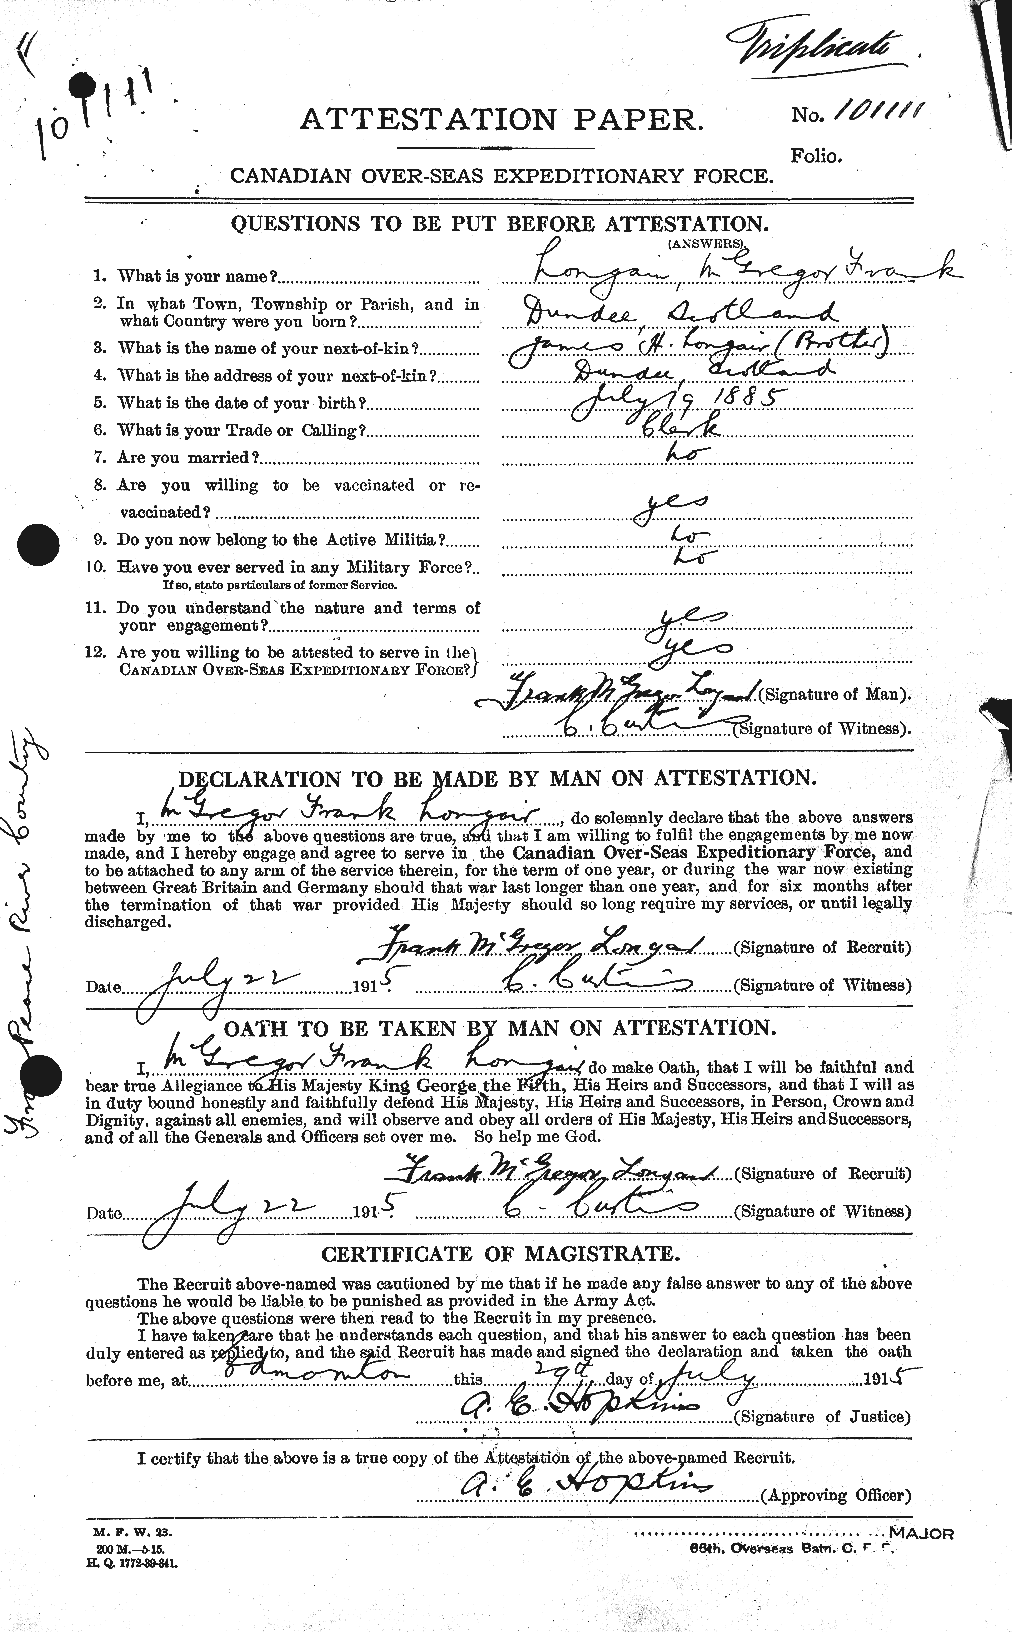 Personnel Records of the First World War - CEF 470934a